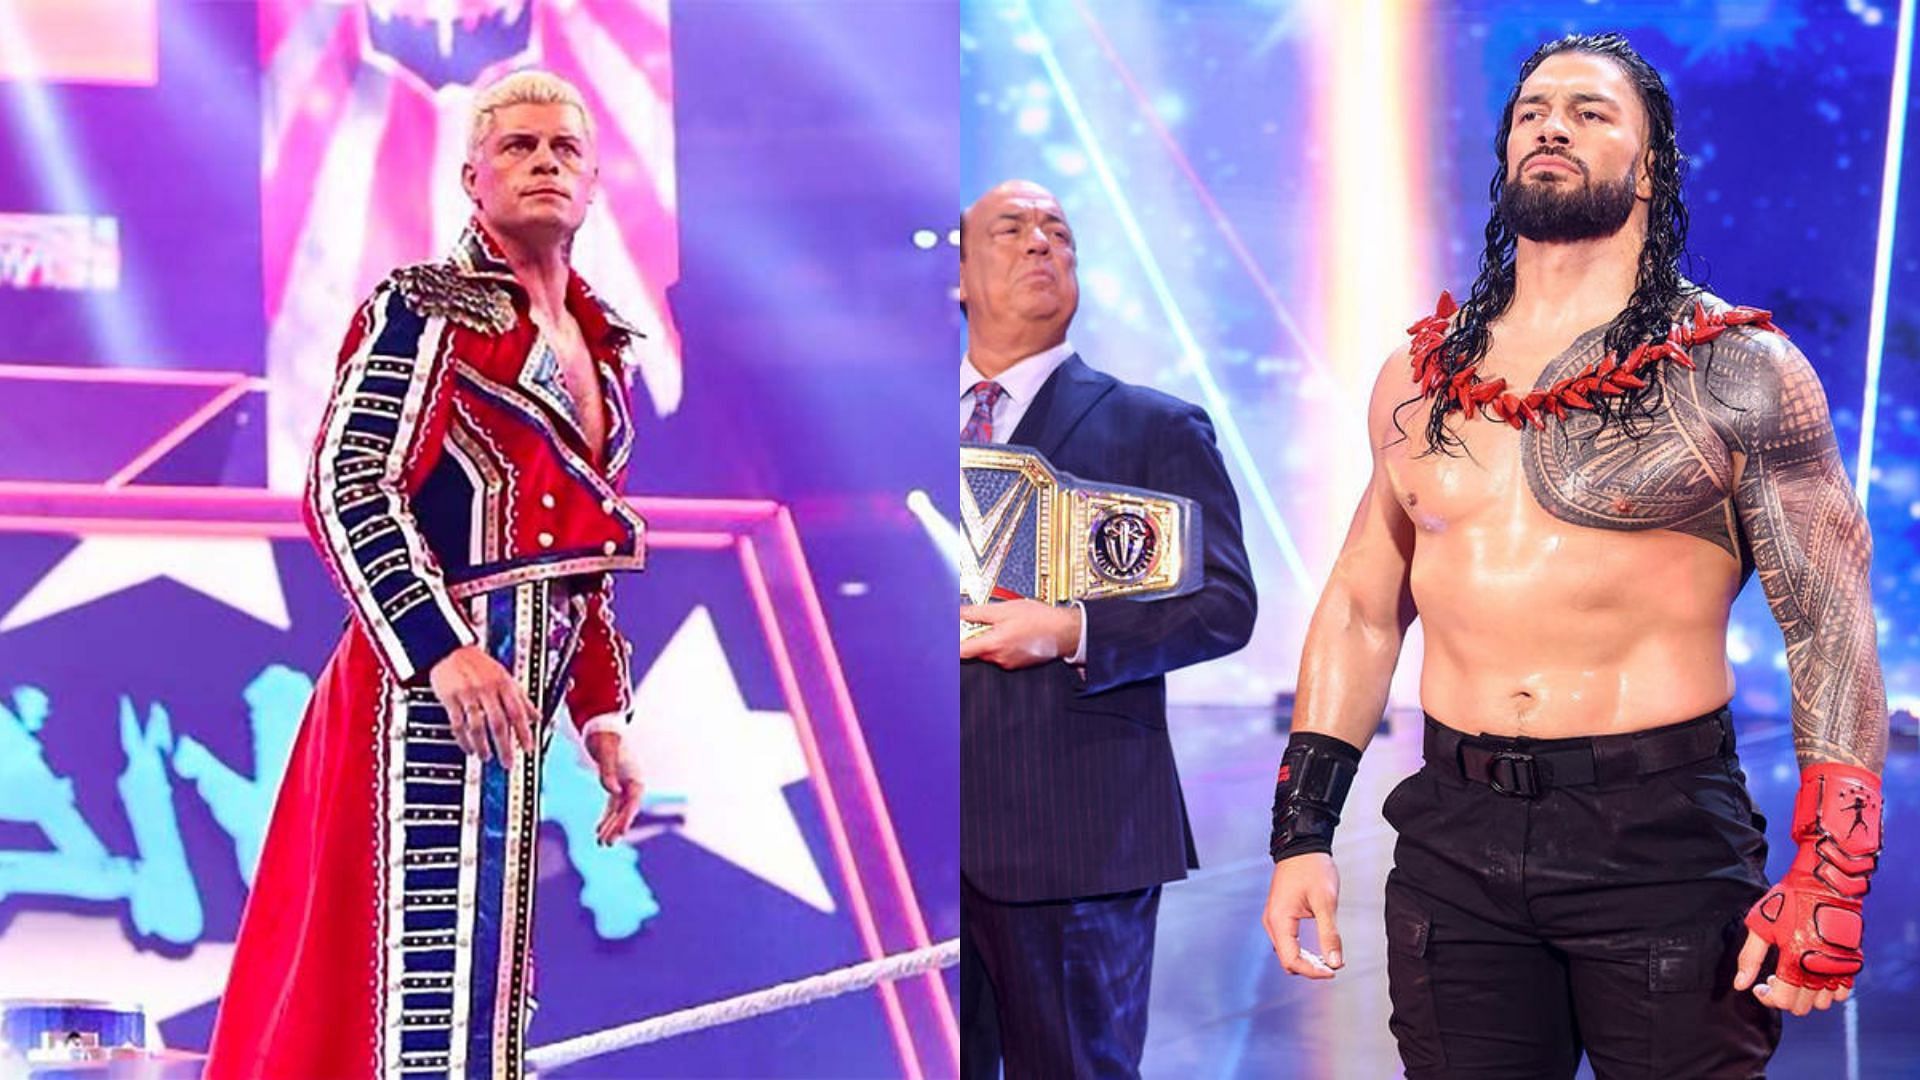 Cody Rhodes  vs. Roman Reigns is a highly-anticipated showdown